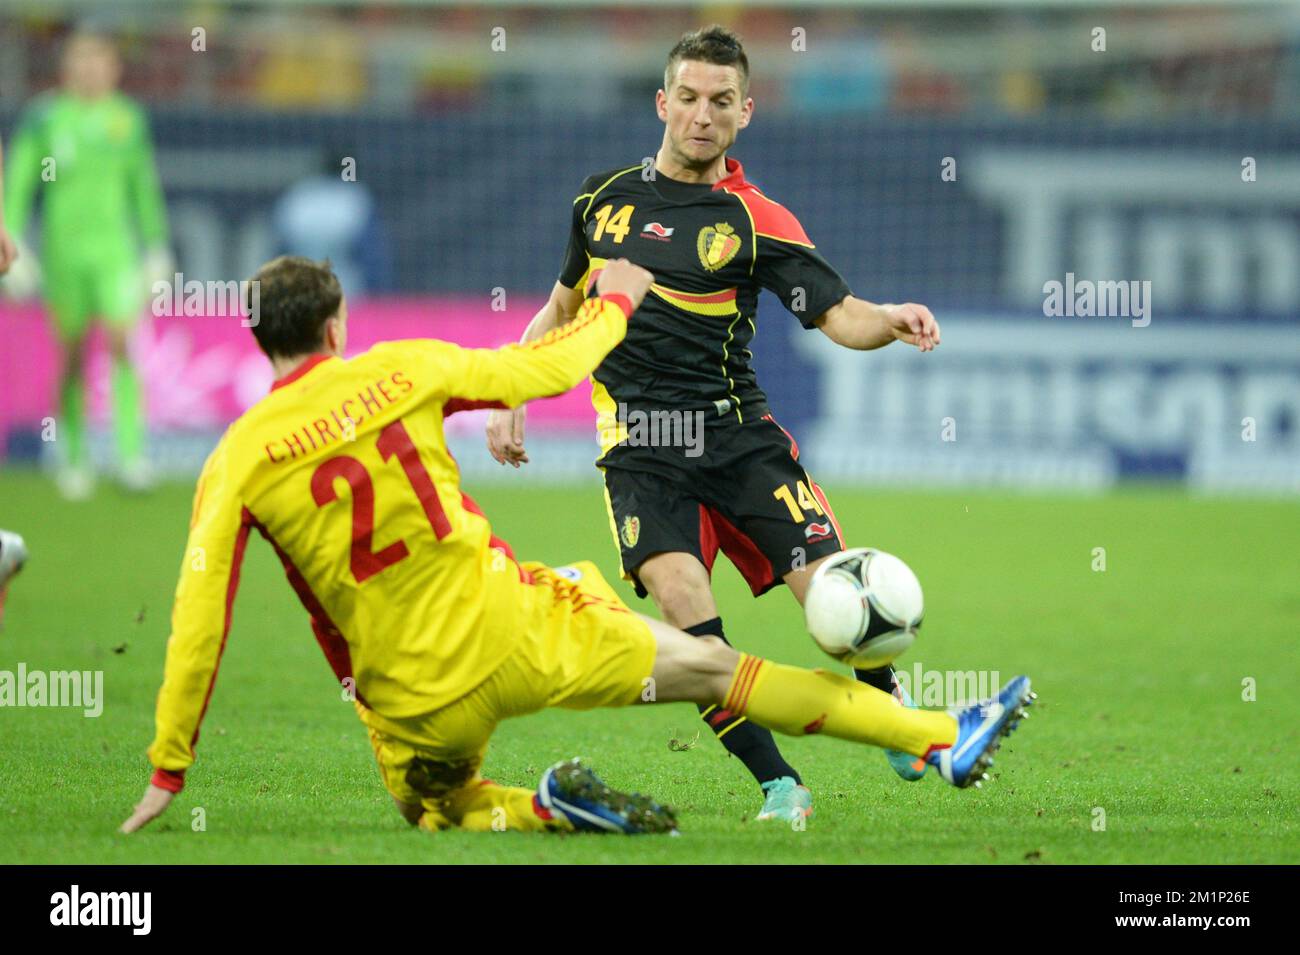 20121114 - BUCAREST, ROMANIA: Belgium's Dries Mertens and Romania's Vlad Chiriches fight for the ball during a friendly soccer game between Romania and the Belgian national team 'the Red Devils' in Bucharest, Romania, Wednesday 14 November 2012. BELGA PHOTO YORICK JANSENS Stock Photo